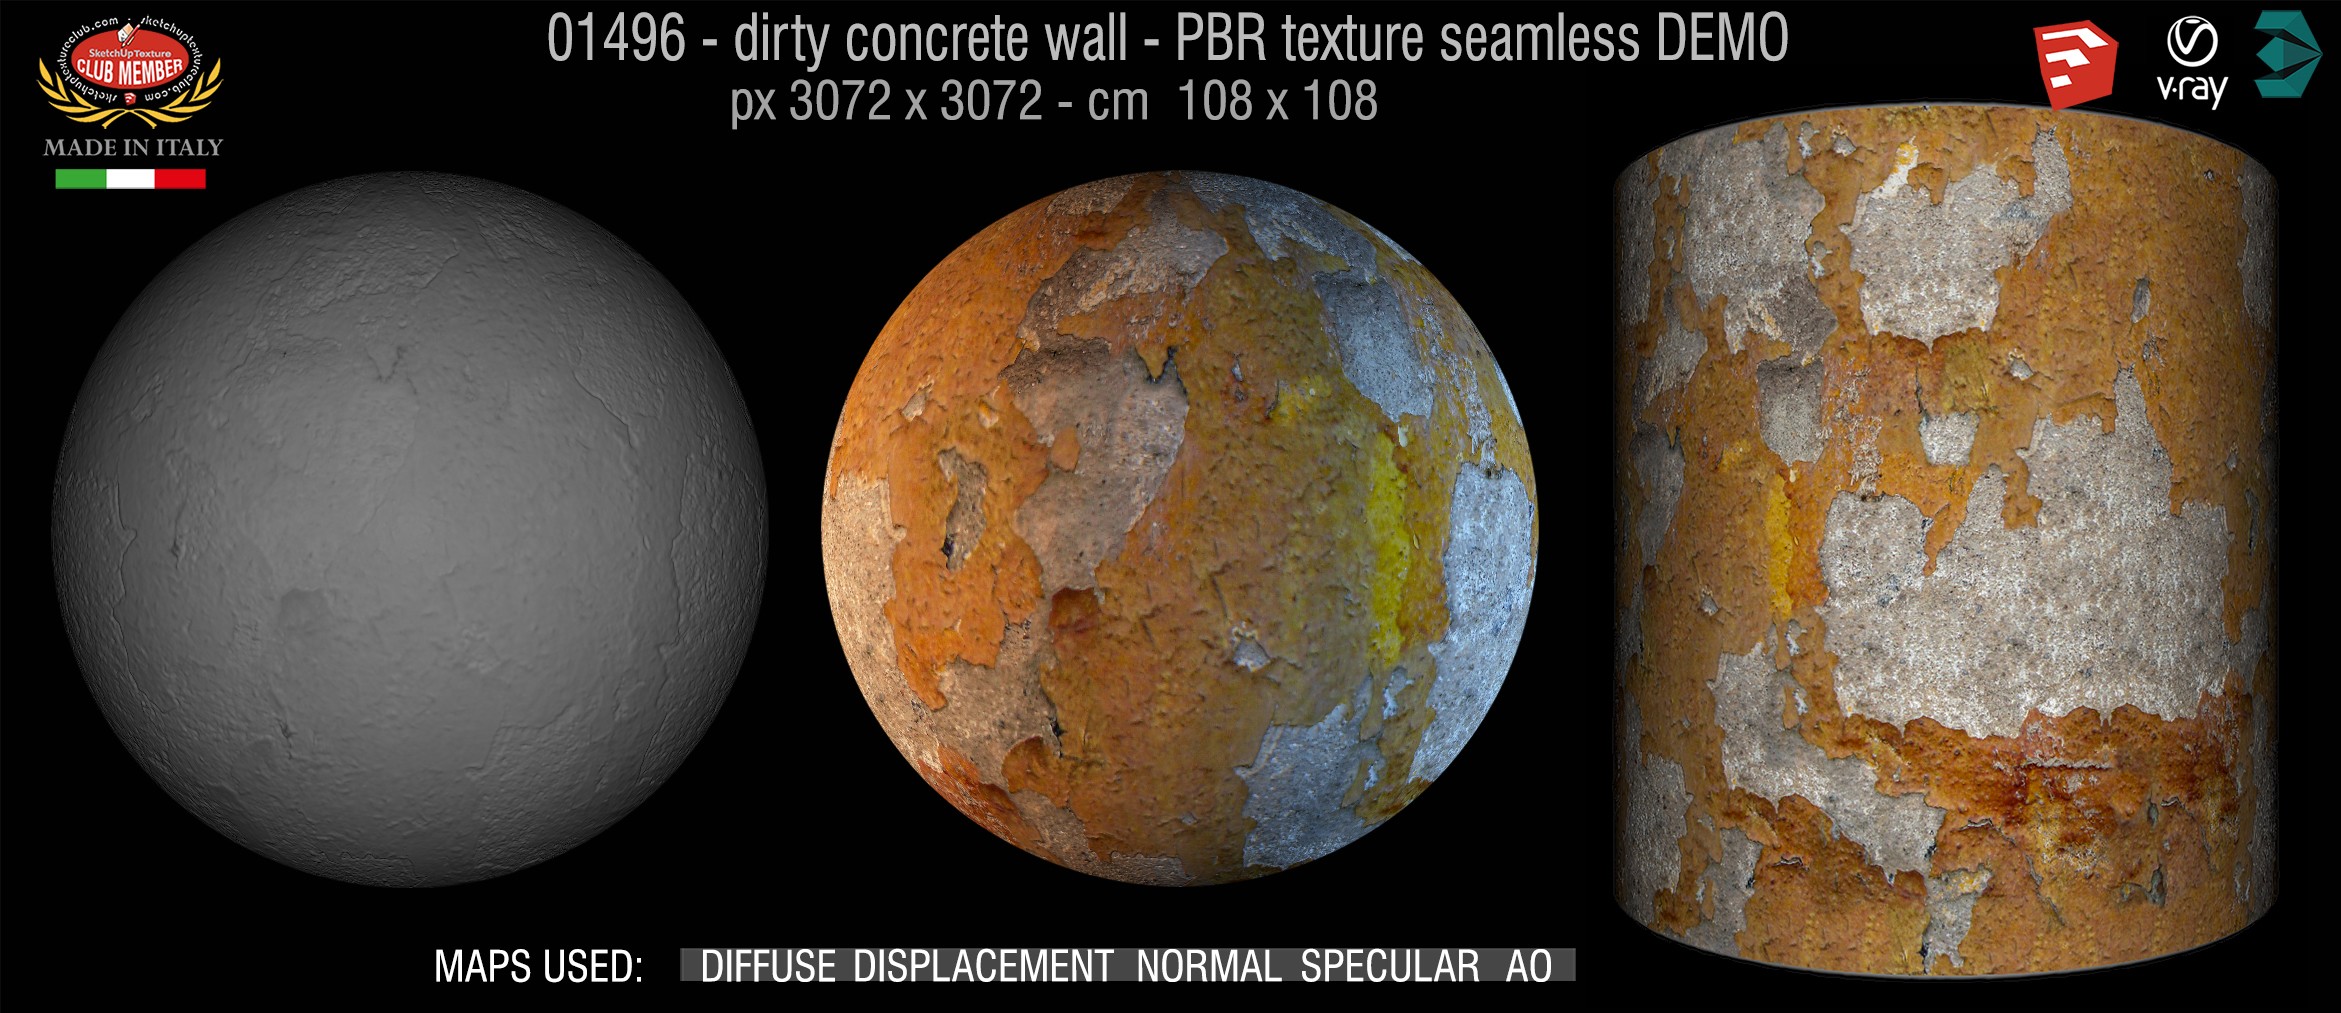 01496 Concrete bare dirty wall PBR texture seamless DEMO